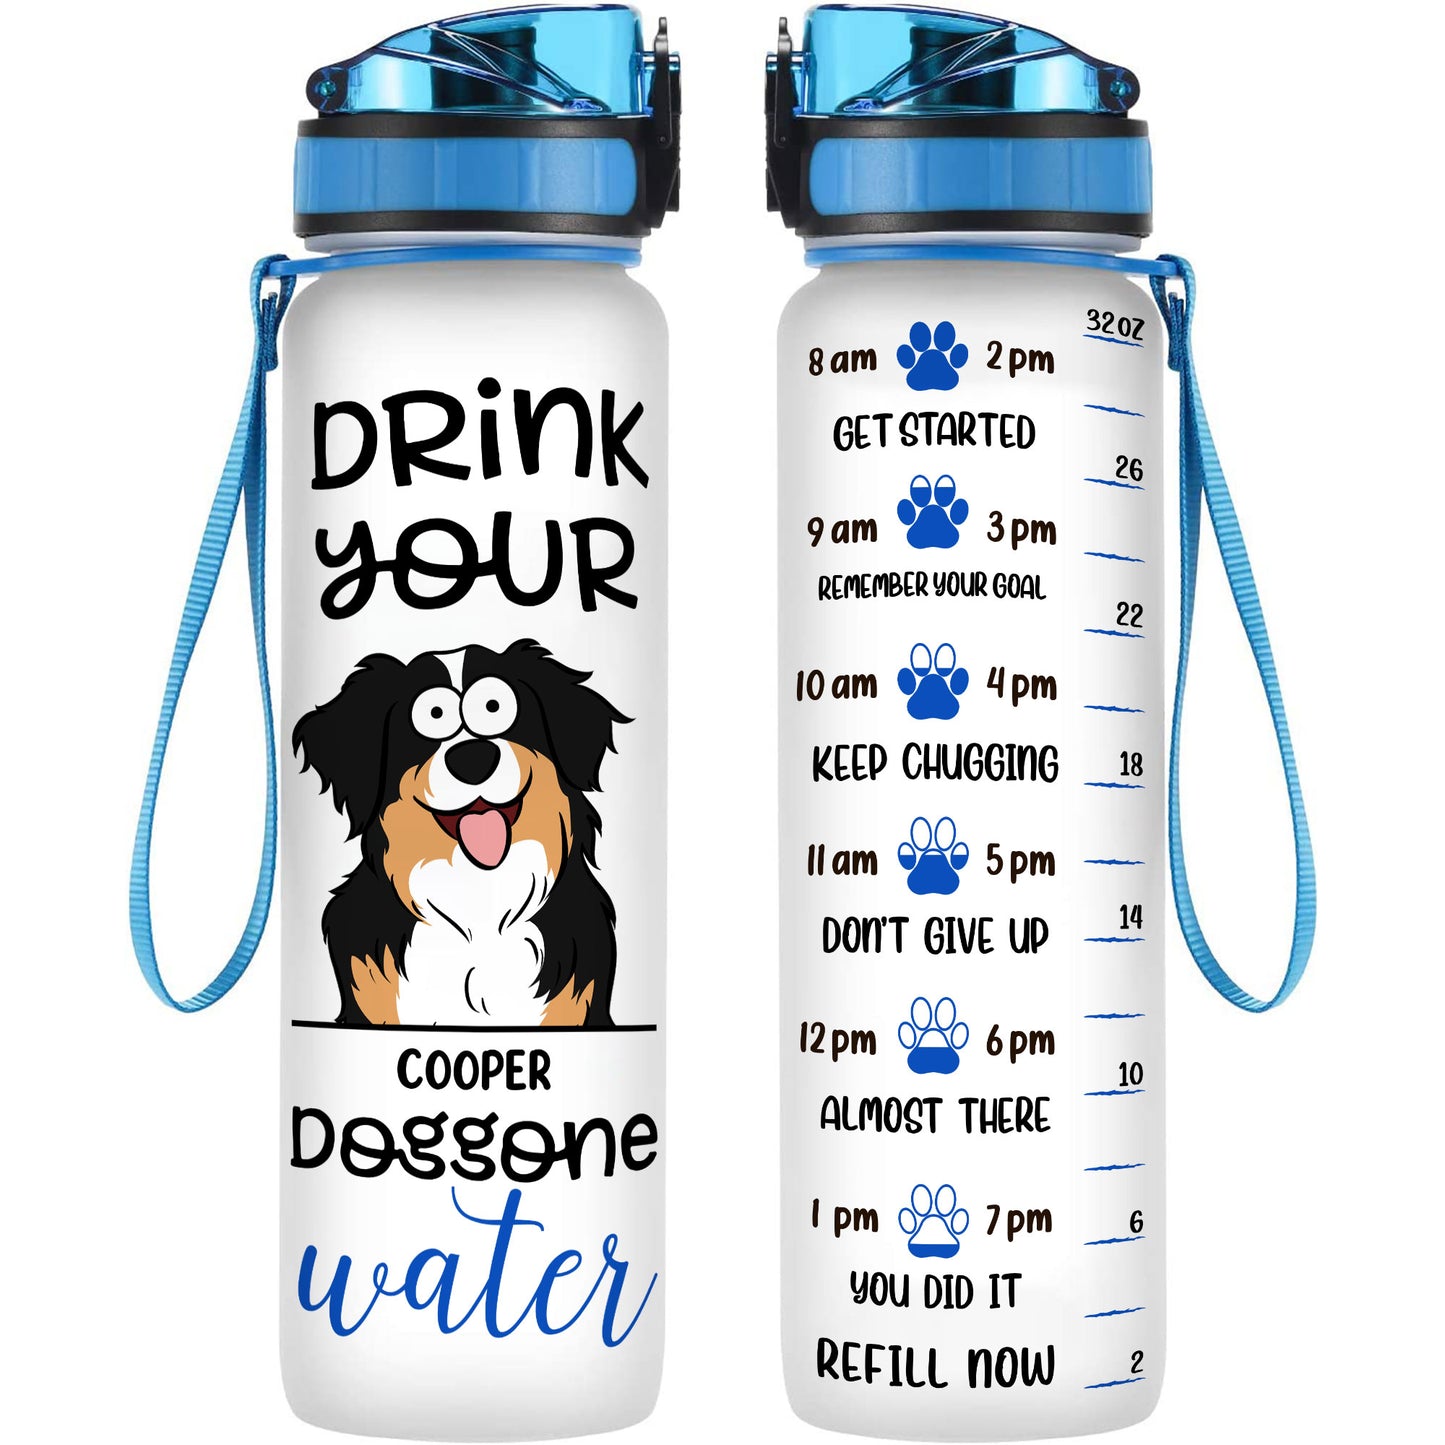 Drink Your Dog Gone Water - Personalized Water Bottle With Time Marker